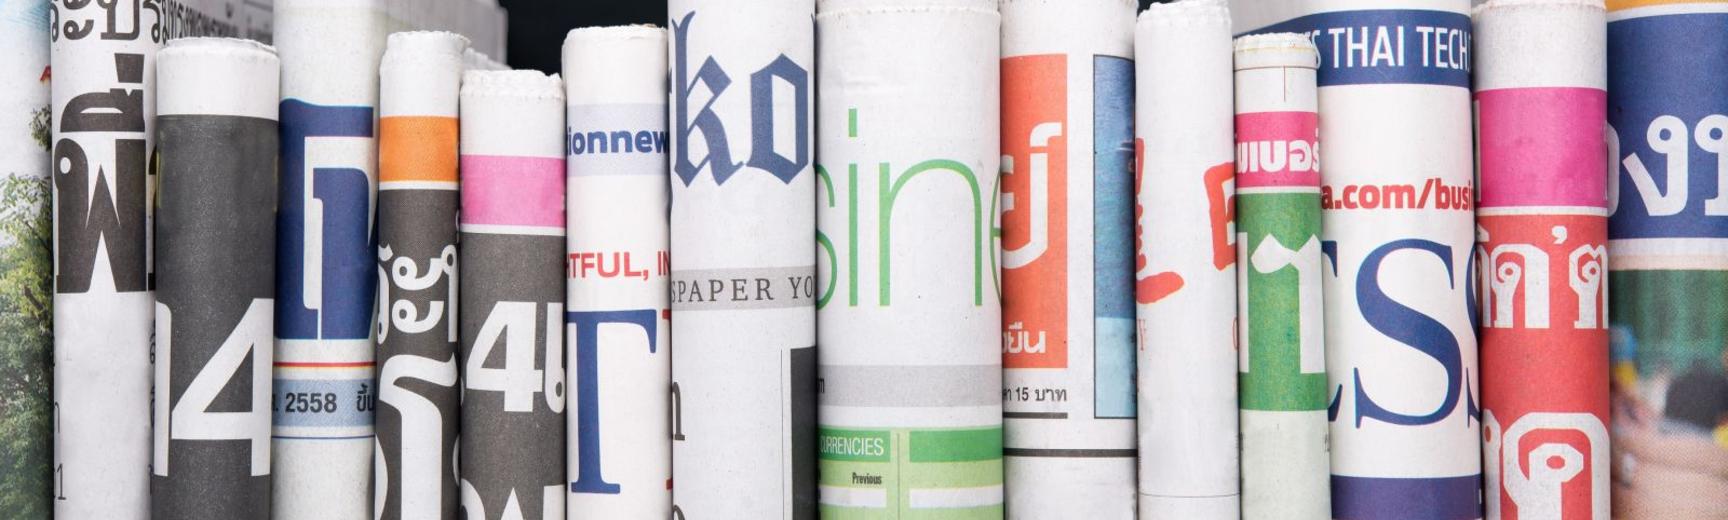 Newspapers from around the world